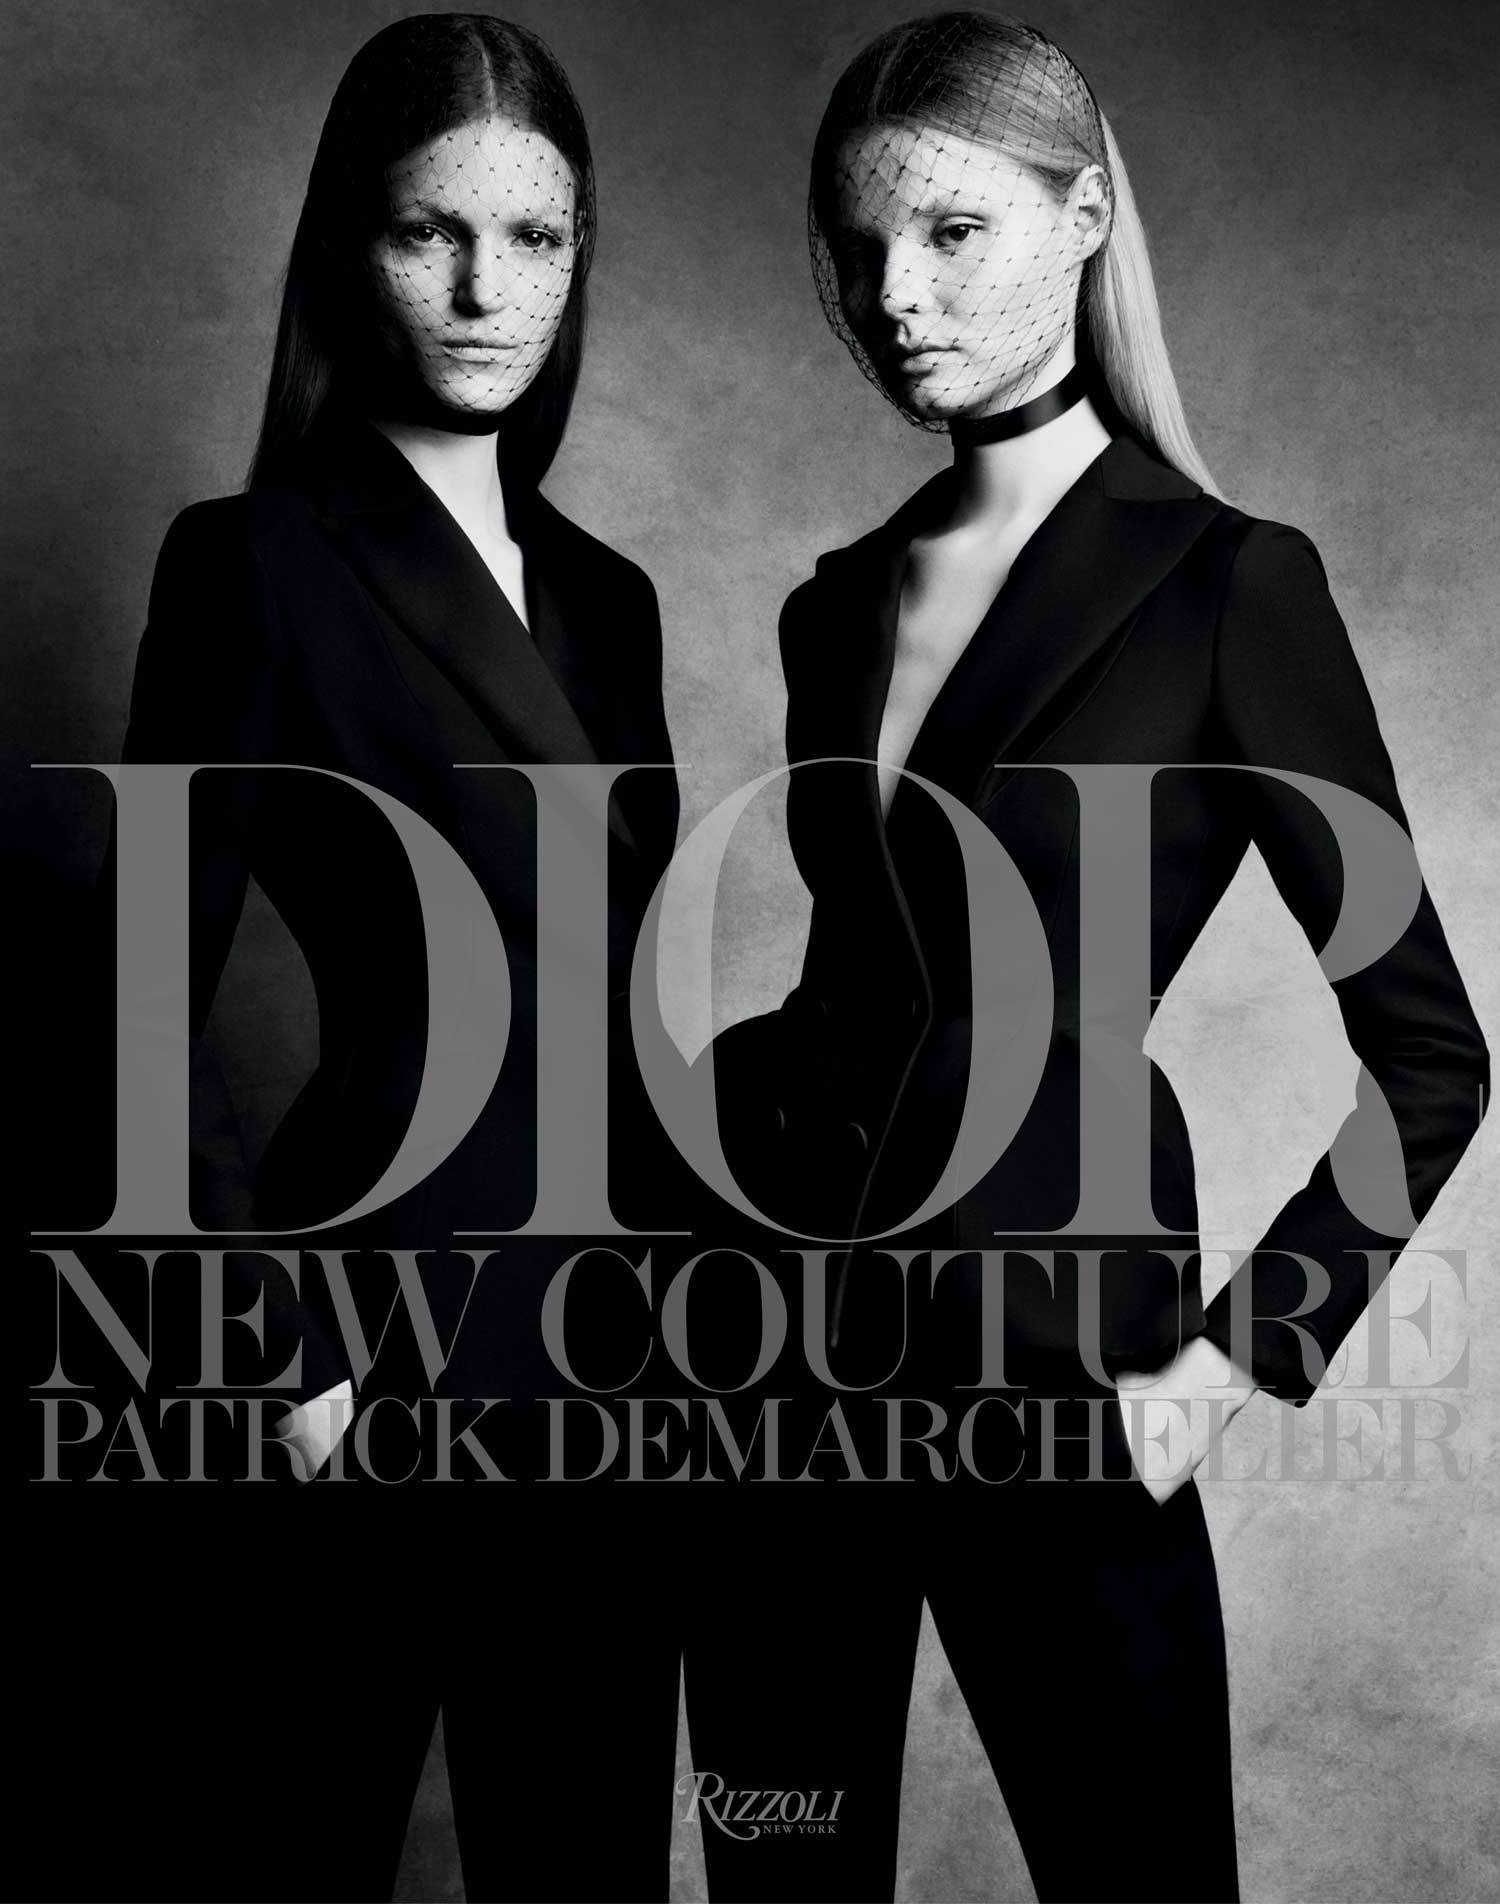 Patrick Demarchlier's DIOR: New Couture